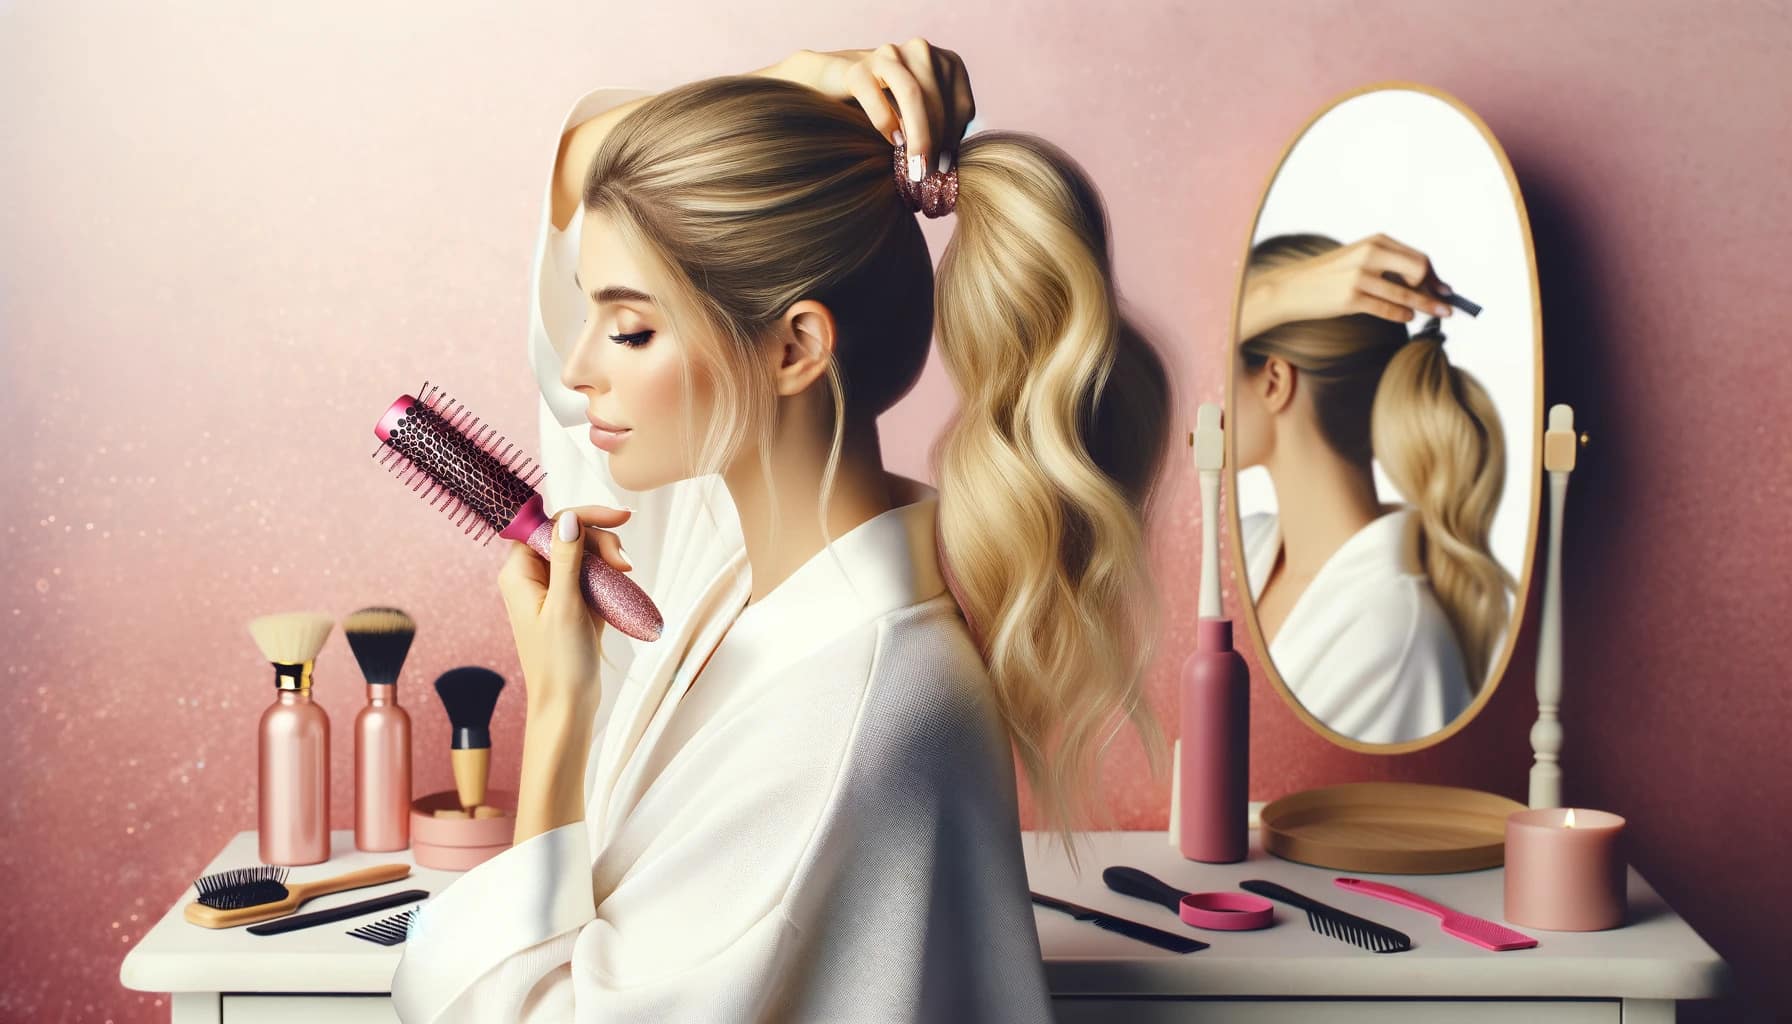 Beautiful blonde woman with her hair pulled back into a loose ponytail, sitting in front of a vanity mirror